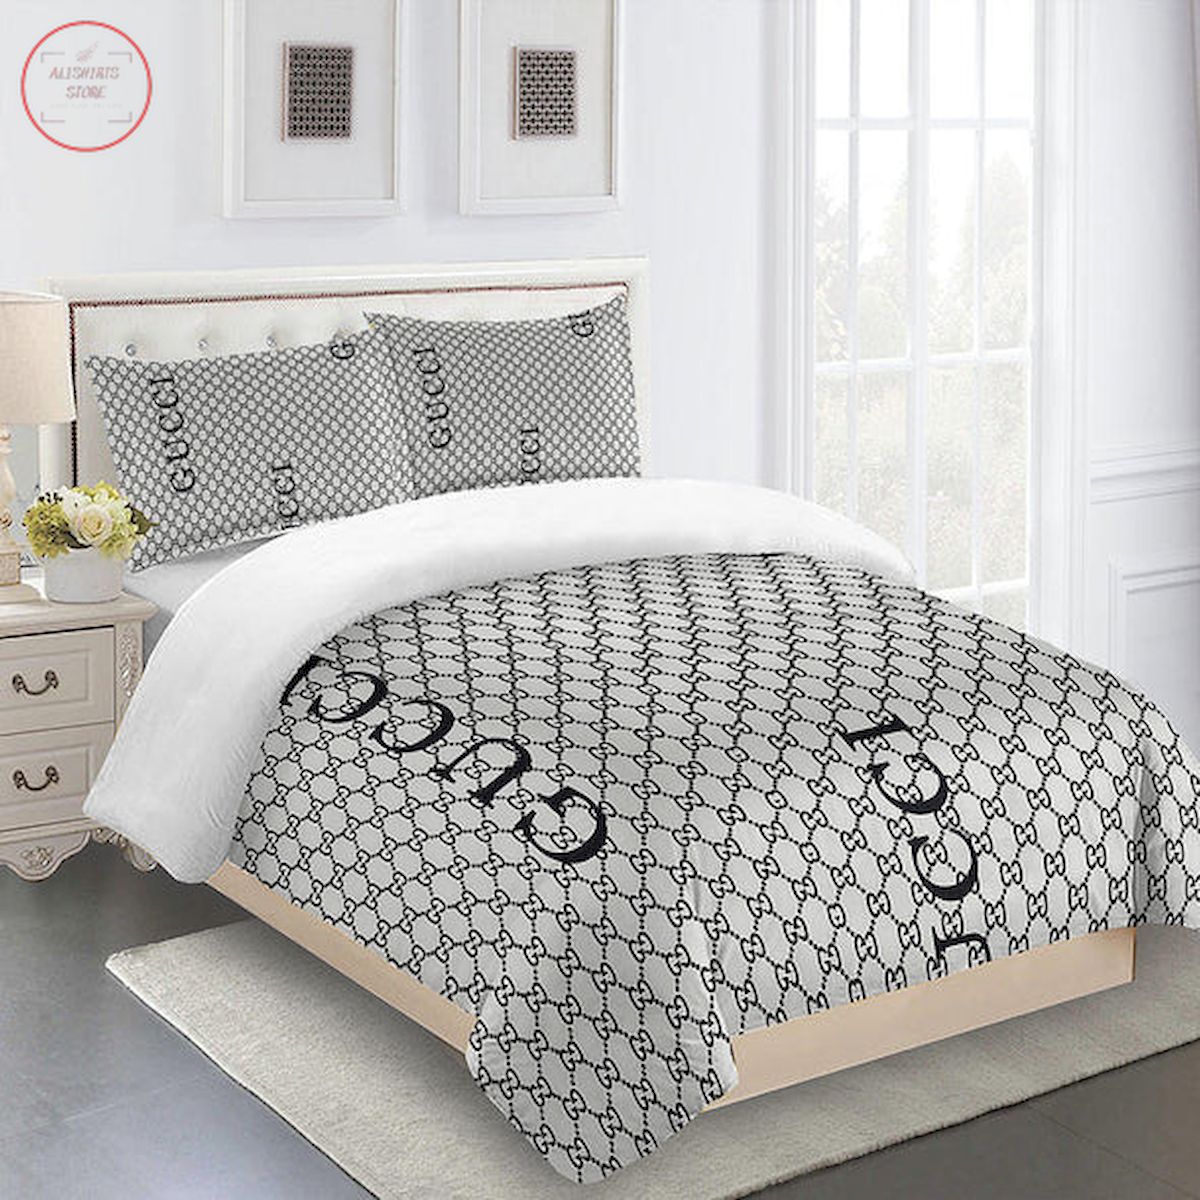 Gucci bedding set gray and black Luxury bed sheets